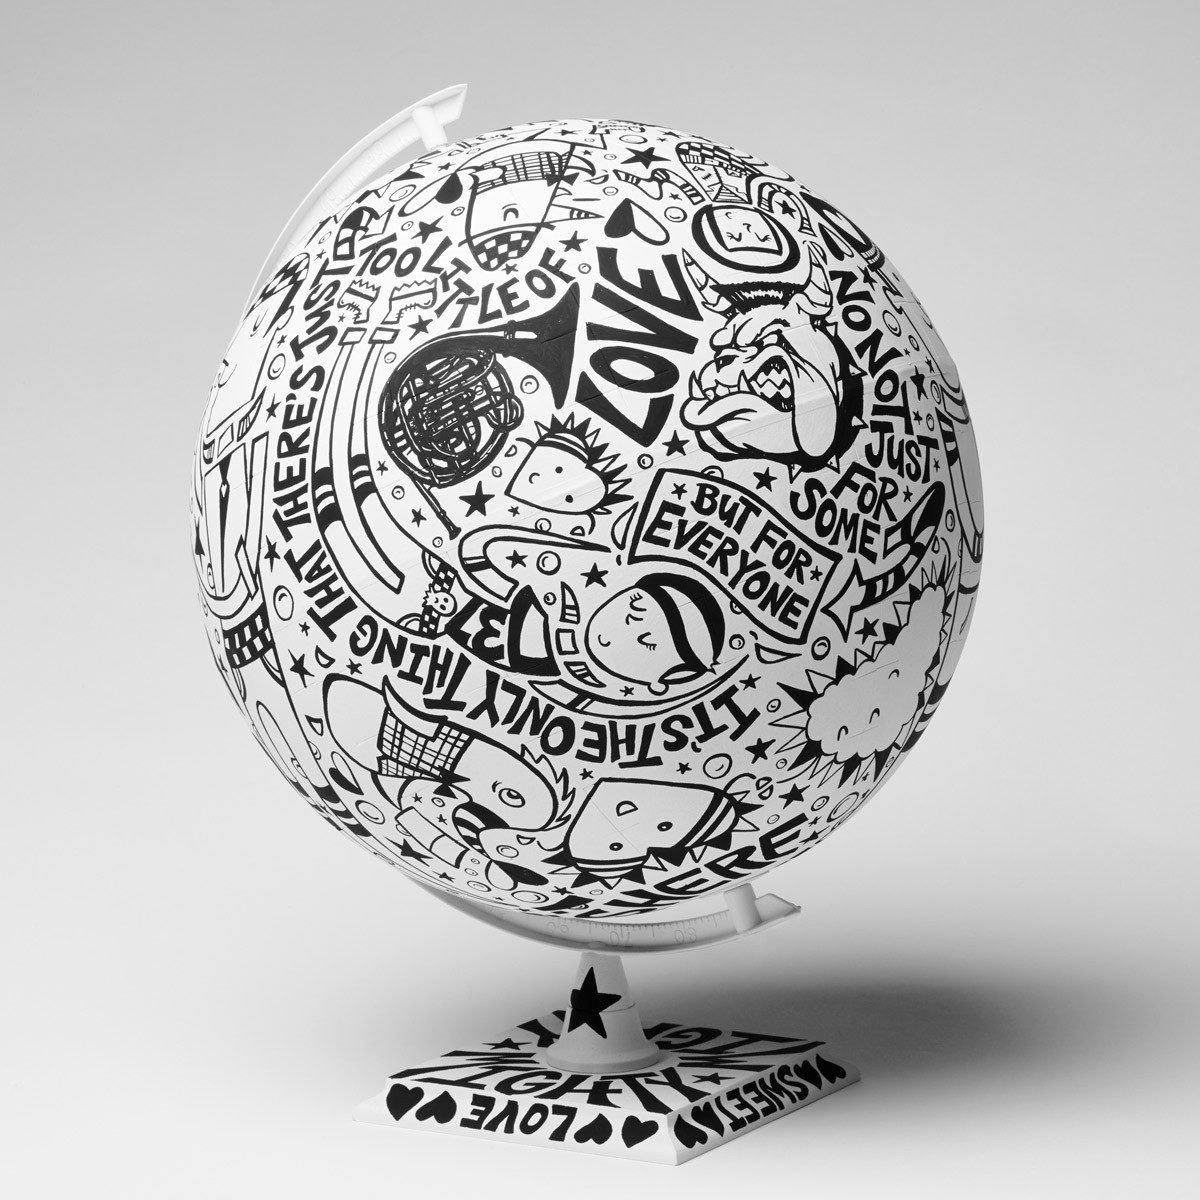 What The World Needs Now Is Love Globe | Fine Art and Limited Edition Prints | The Art Of Nan Coffey